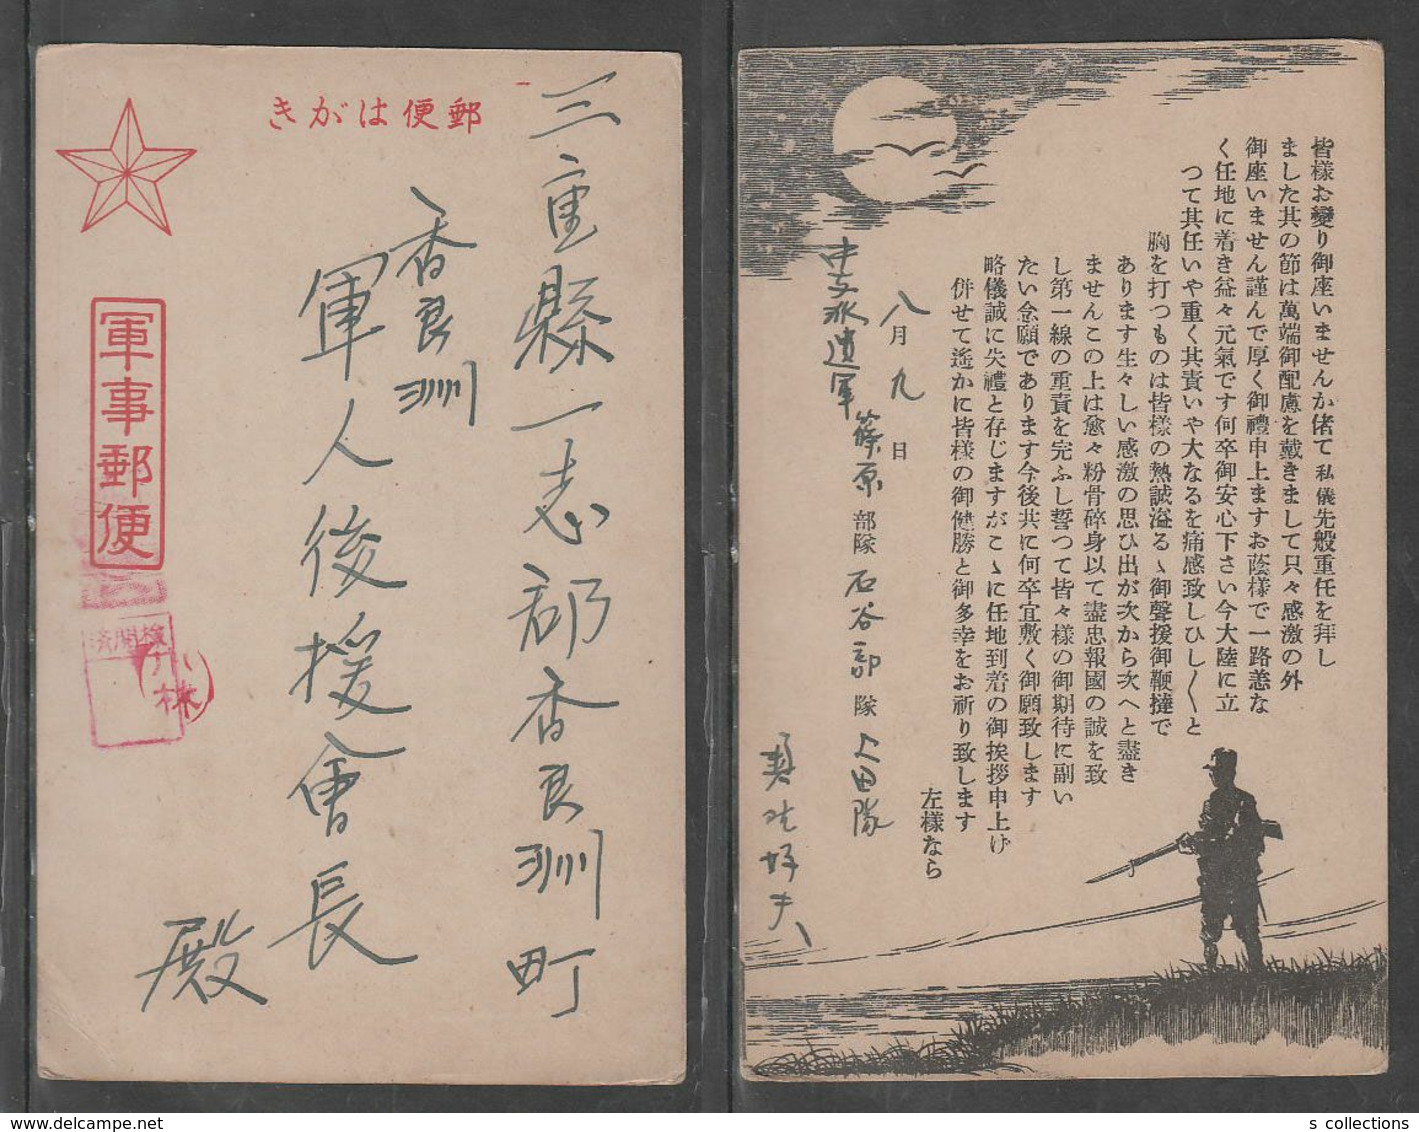 JAPAN WWII Military Moonlit Night Japanese Soldier Picture Postcard CENTRAL CHINA WW2 MANCHURIA CHINE JAPON GIAPPONE - 1943-45 Shanghai & Nanchino